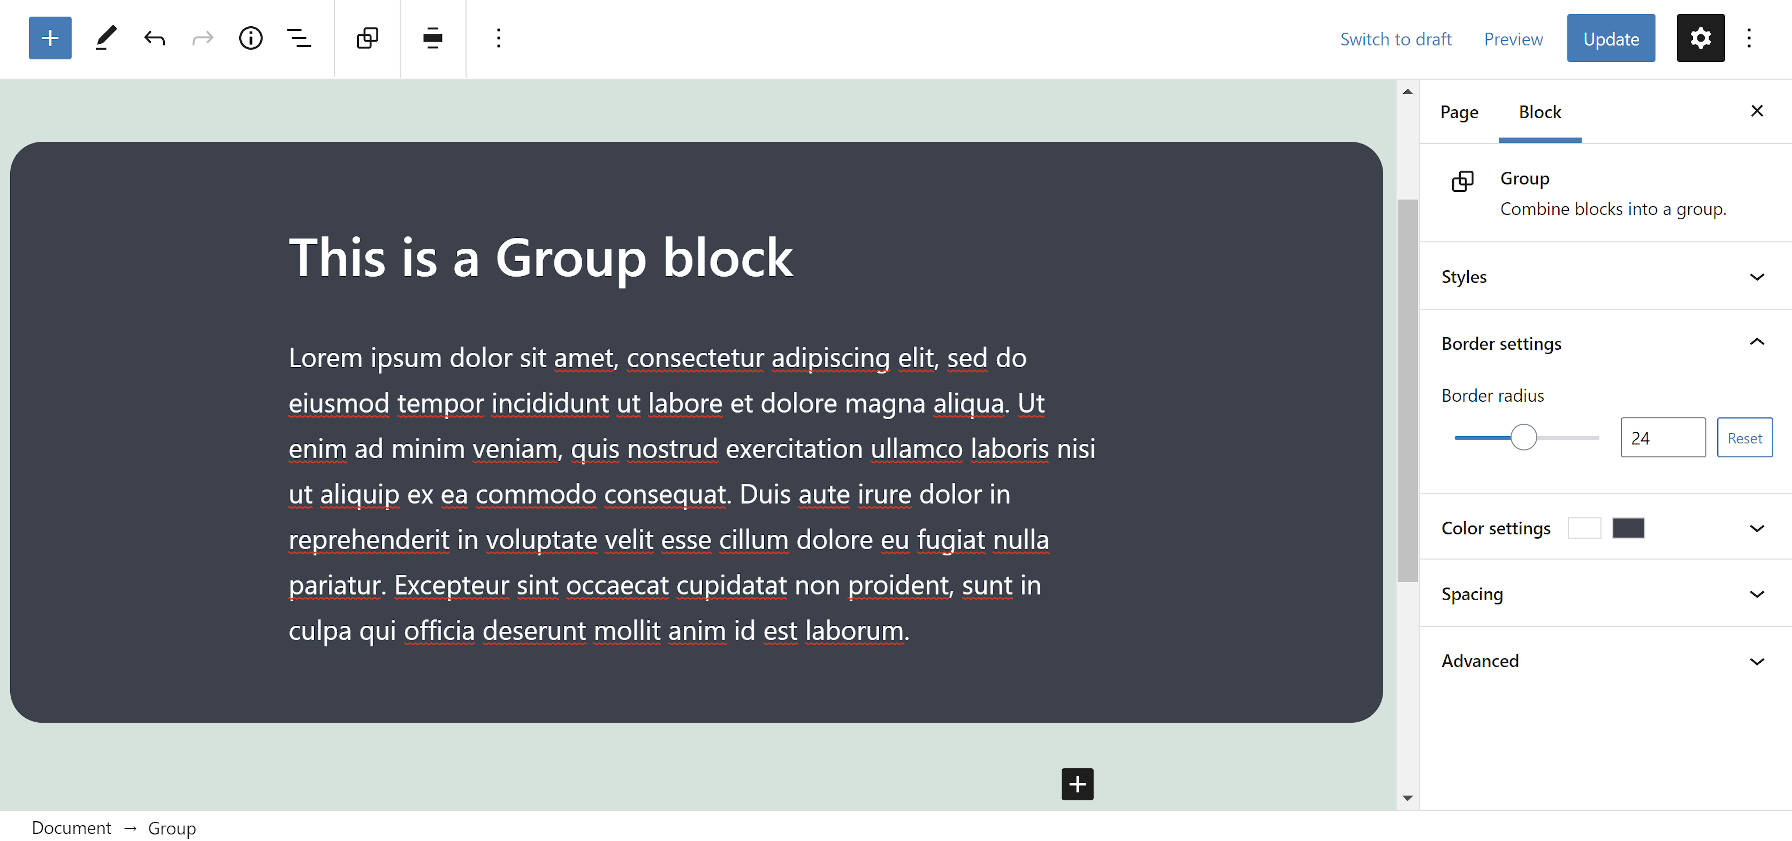 Group block in the editor with rounded borders.